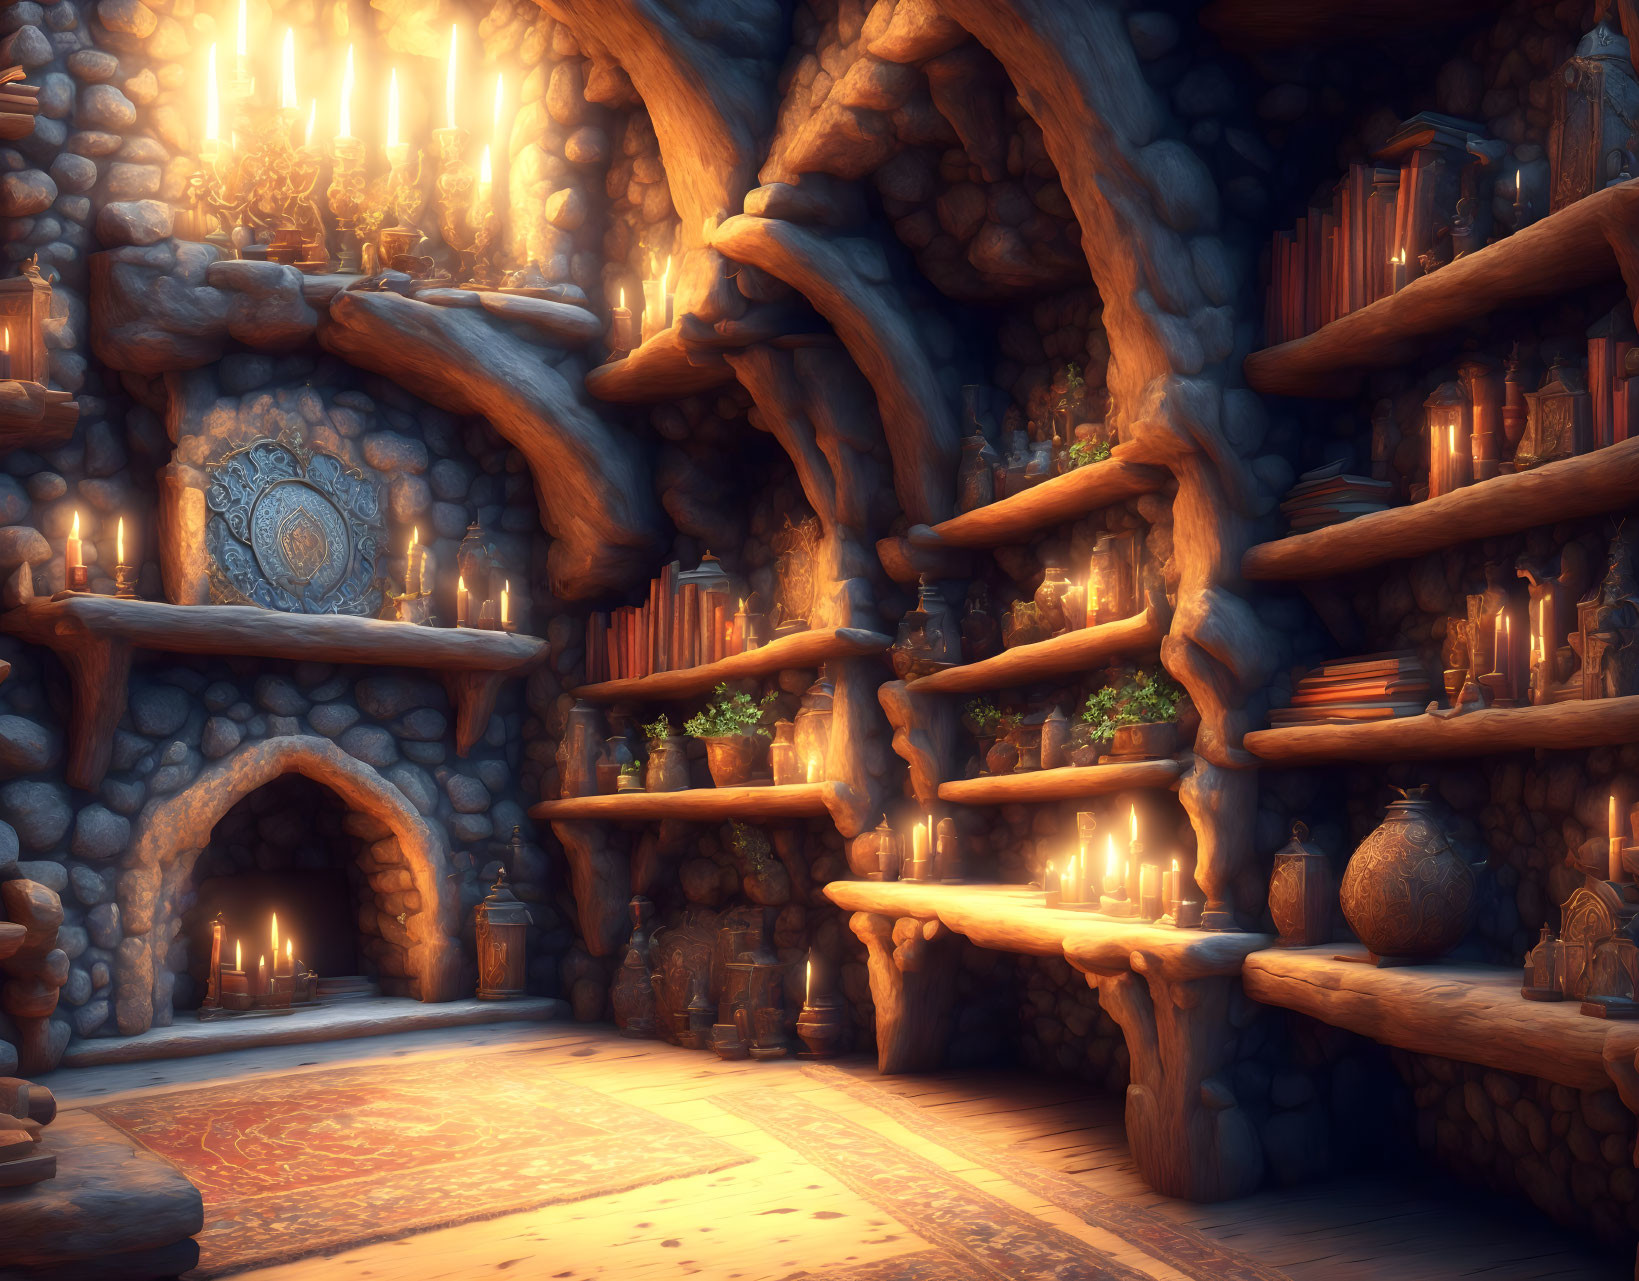 Fantasy-style interior with stone walls, fireplace, candles, books, wooden shelves, and ornate